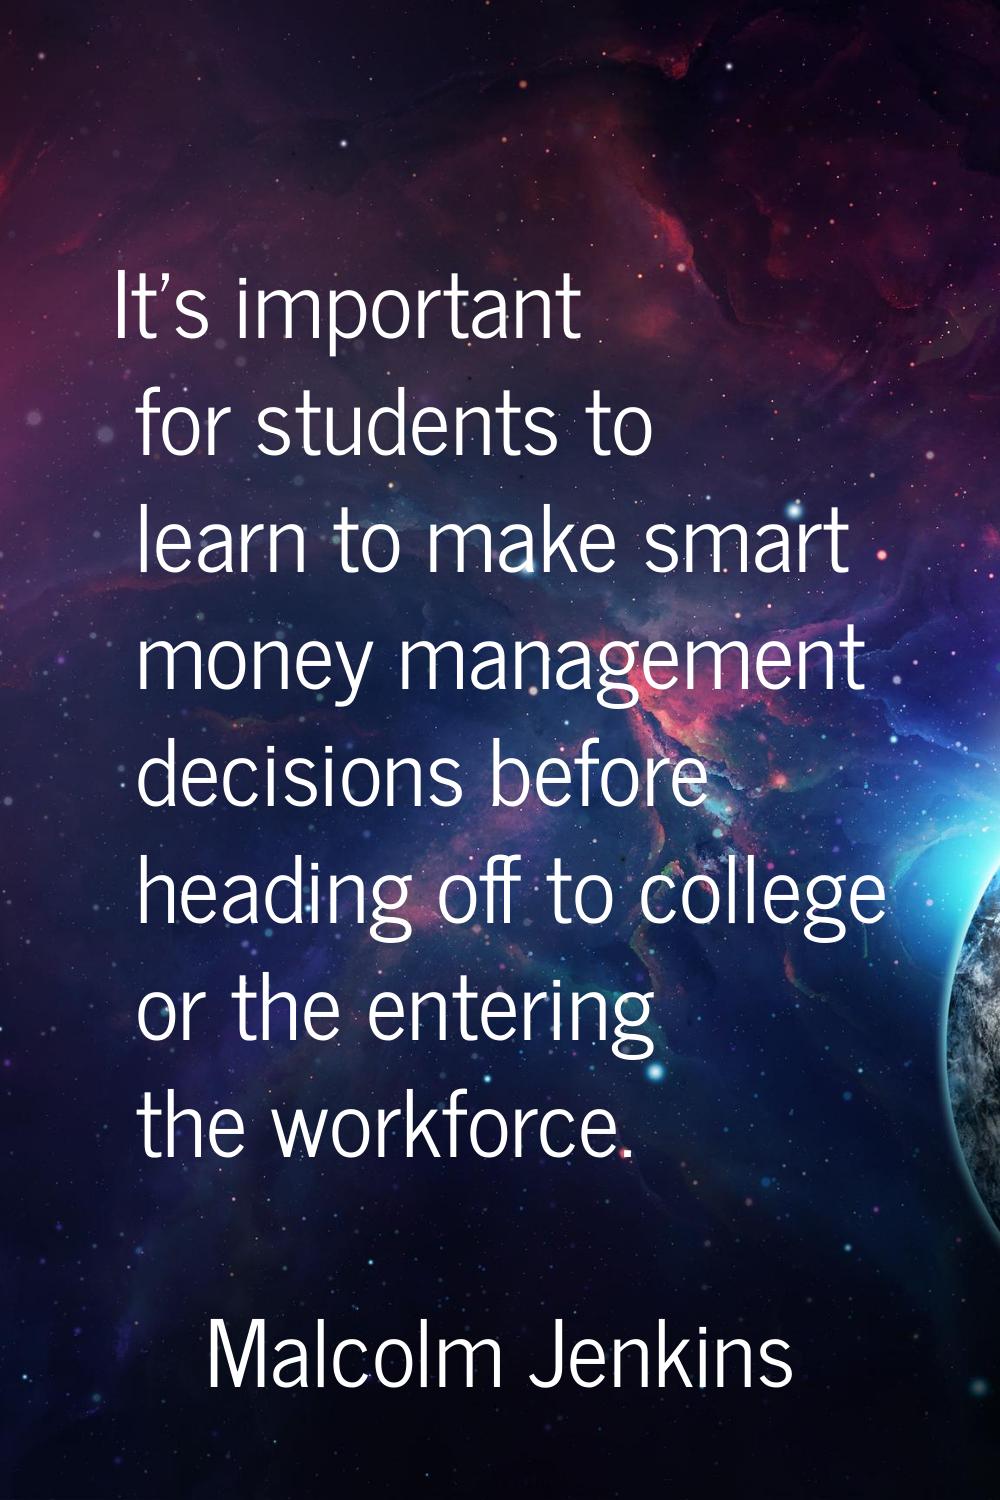 It's important for students to learn to make smart money management decisions before heading off to